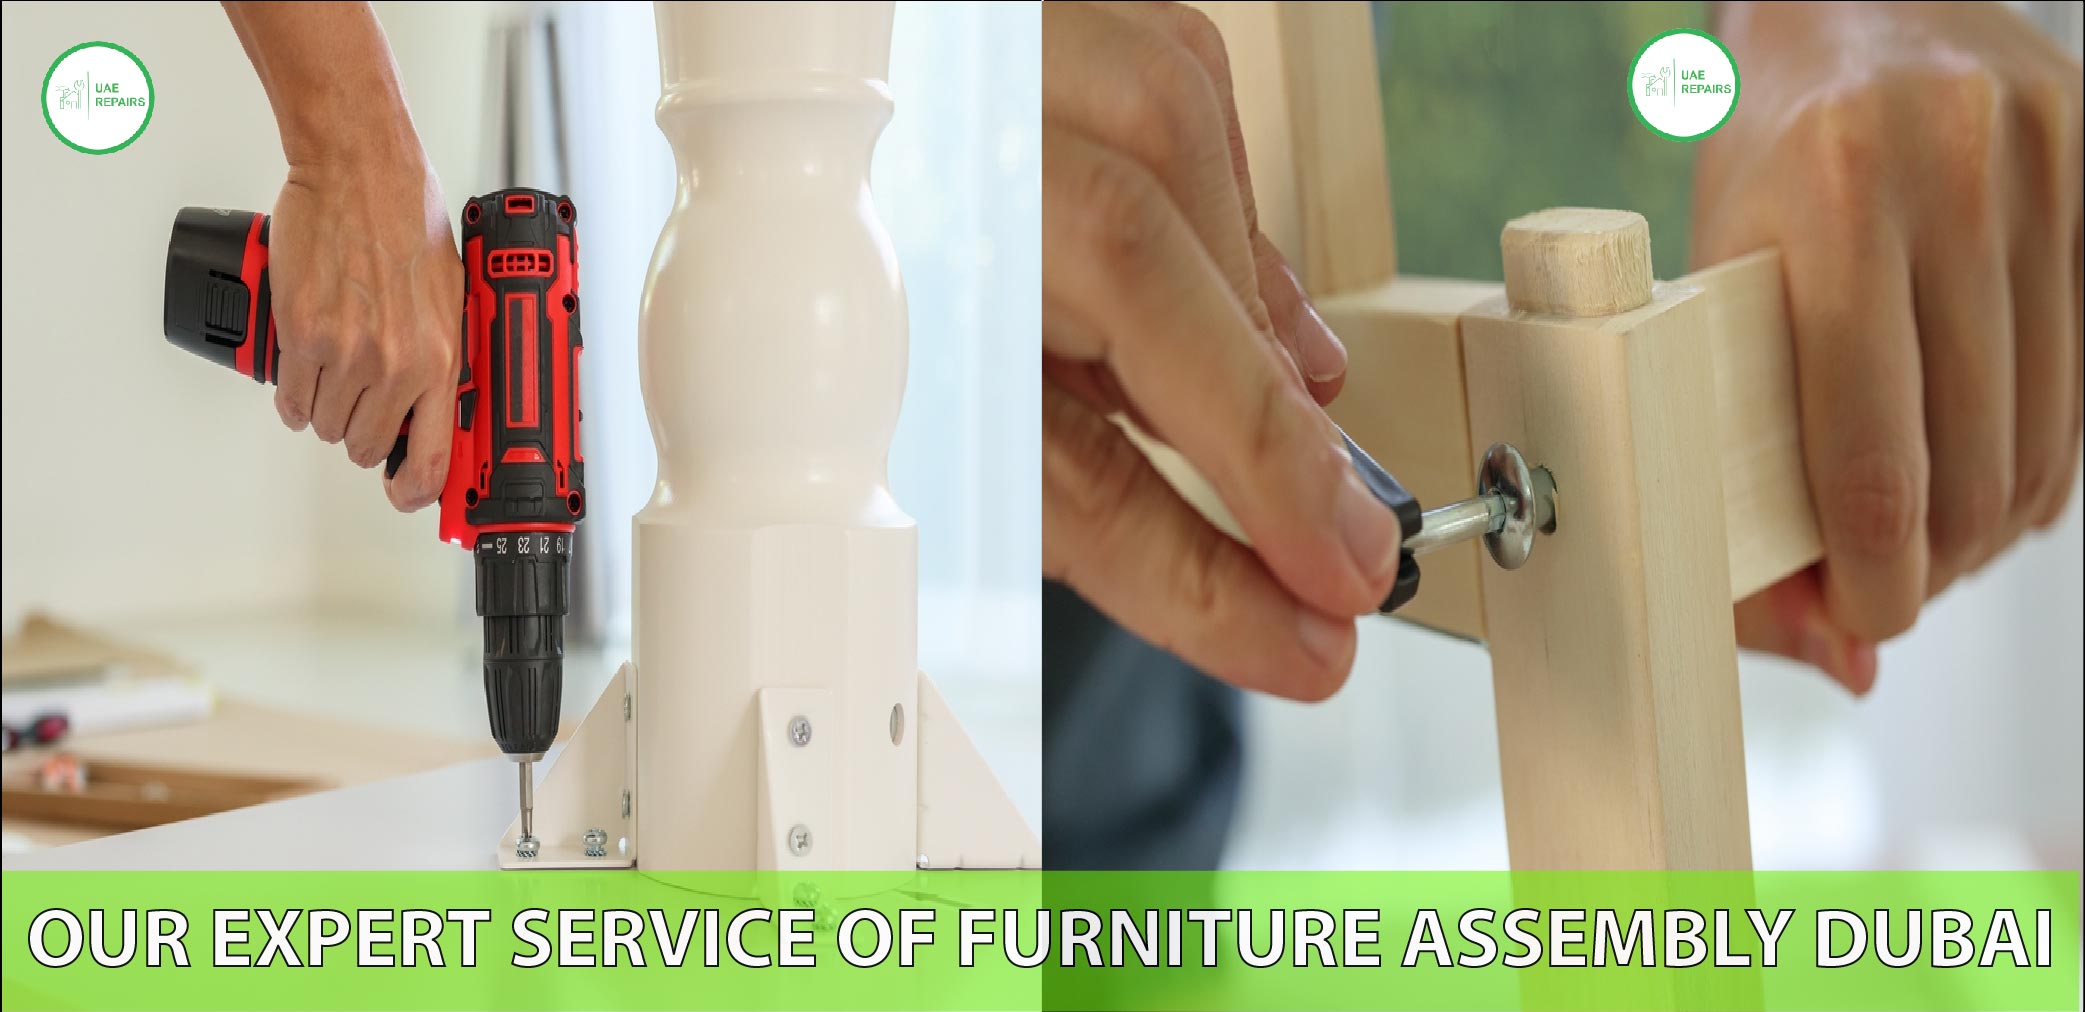 UAE REPAIRS Expert Service of Furniture Assembly Dubai BED, SOFA, INDOOR AND OUTDOOR FURNITURE, DINNING TABLES AND CHAIRS, CONTACT US 0588997516 TO GET ANY KIND OF FURNITURE ASSEMBLY